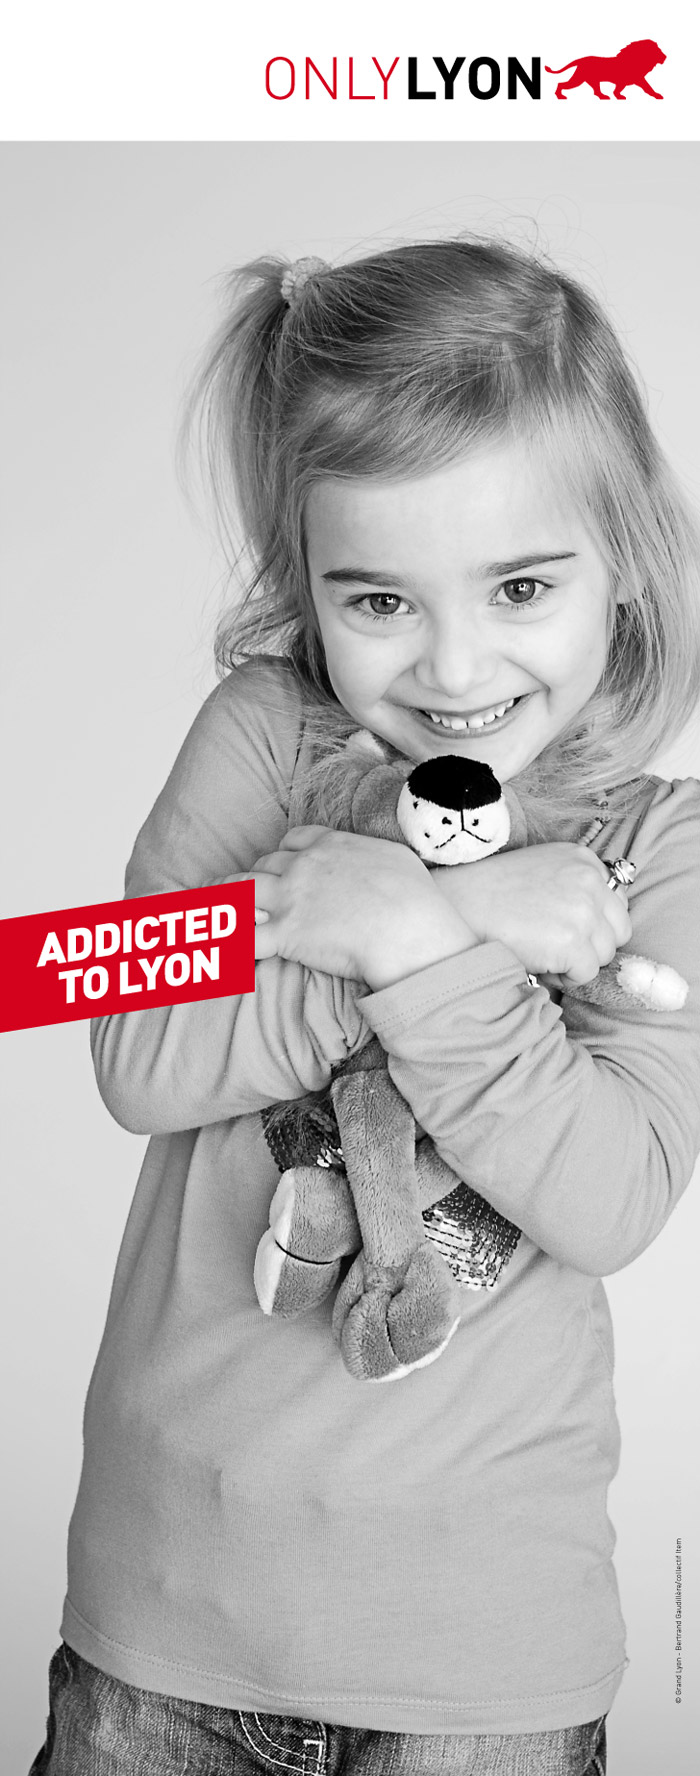 Campagne "Addicted to Lyon"